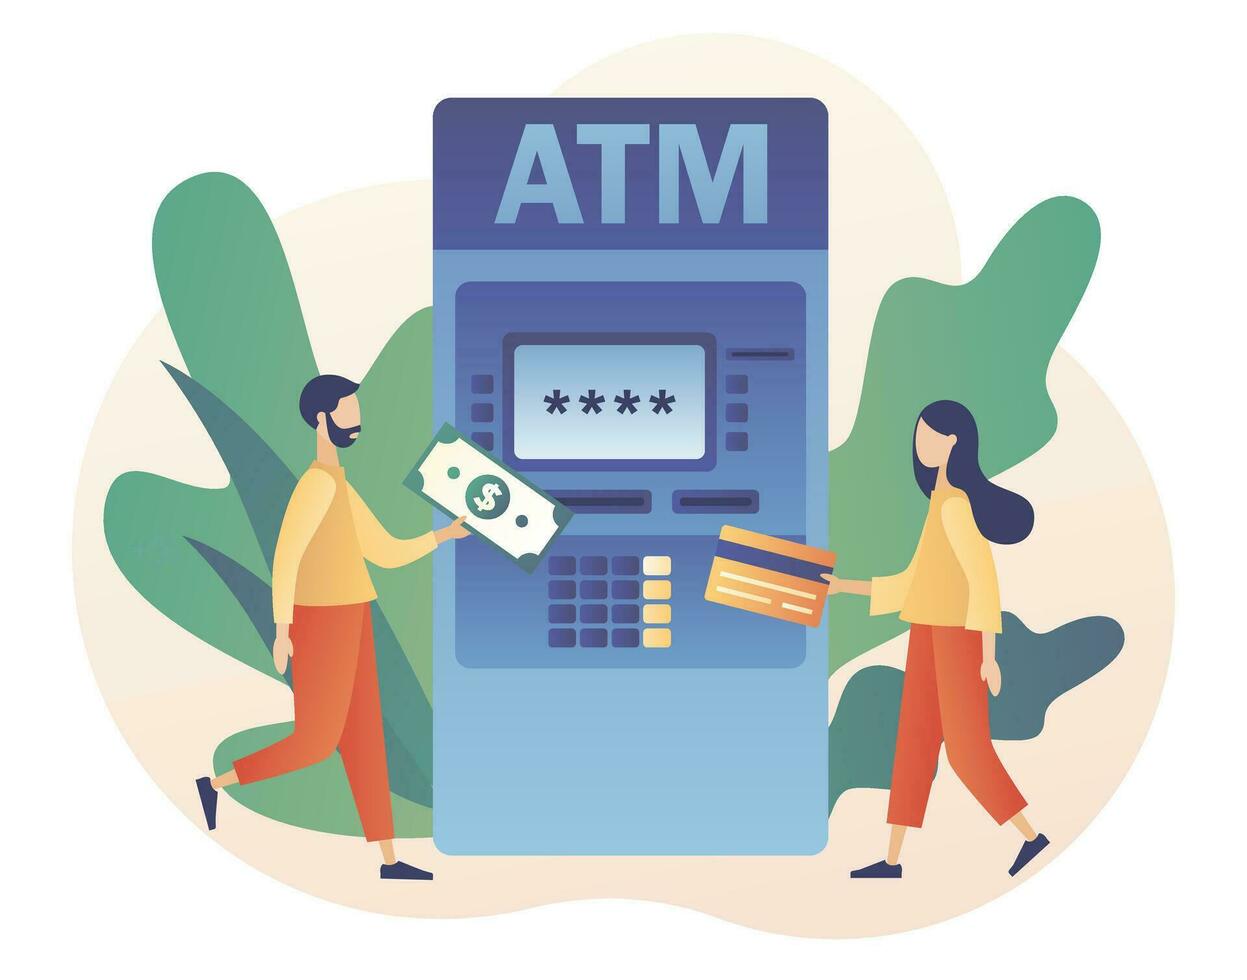 ATM concept. Tiny people waiting in line near atm machine holding credit card and money. Banking terminal. Online payment. Modern flat cartoon style. Vector illustration on white background